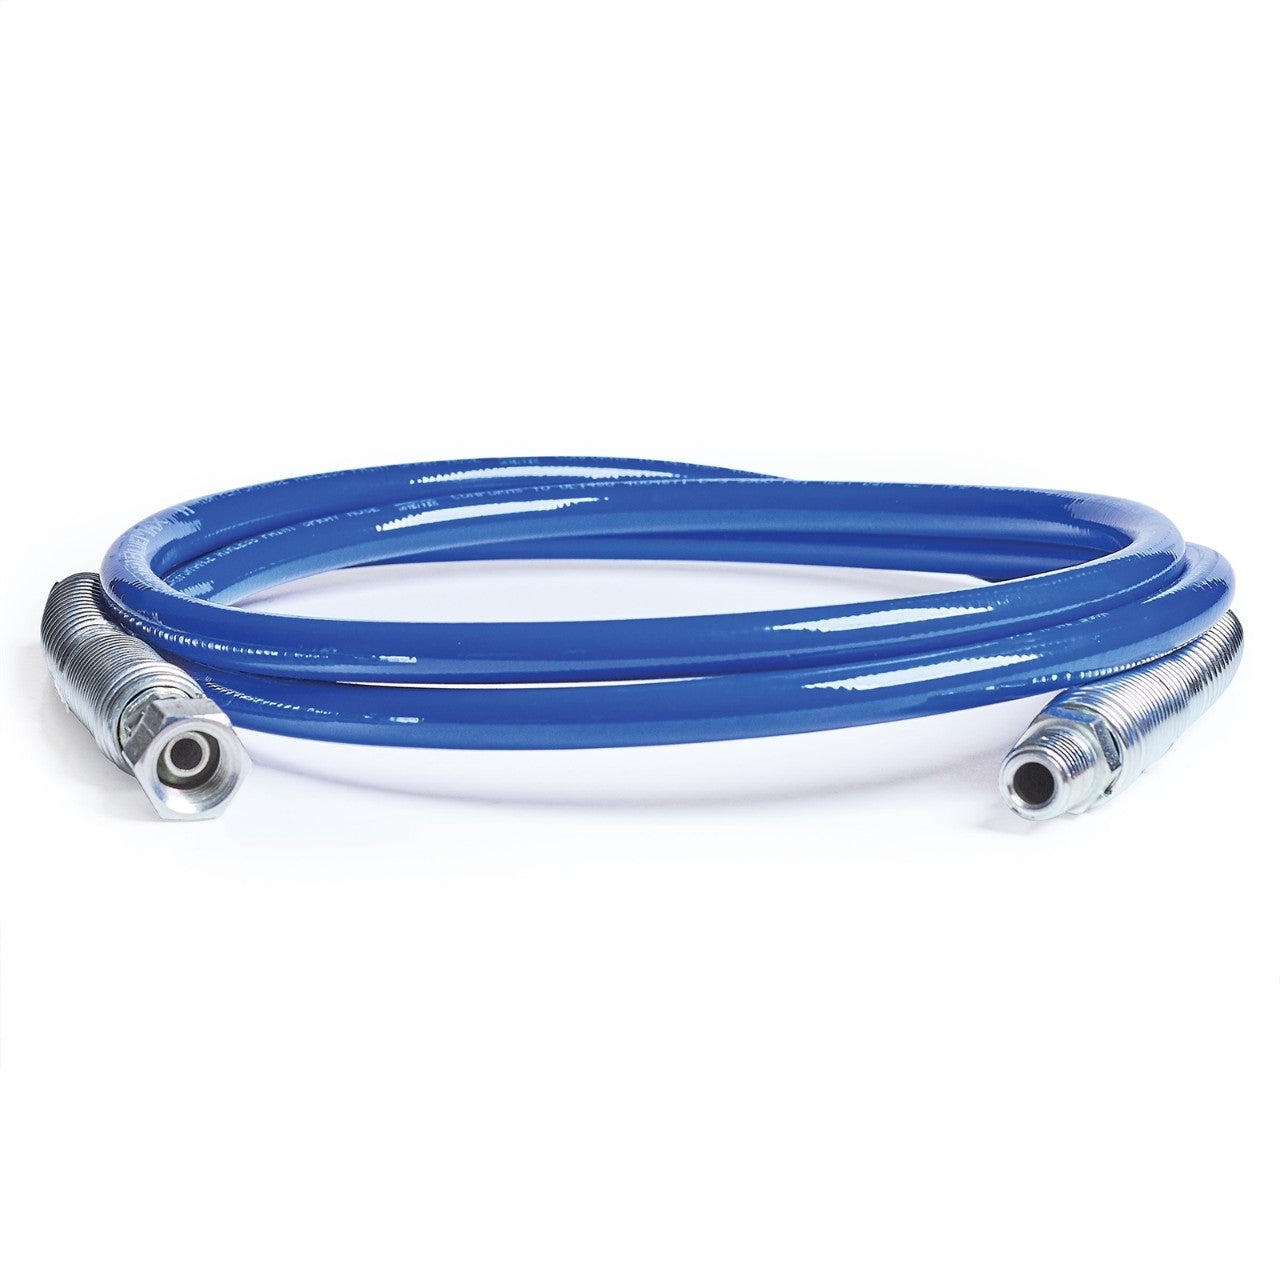 Graco Magnum 50 ft. x 1/4 in. Airless Hose 247340 - The Home Depot